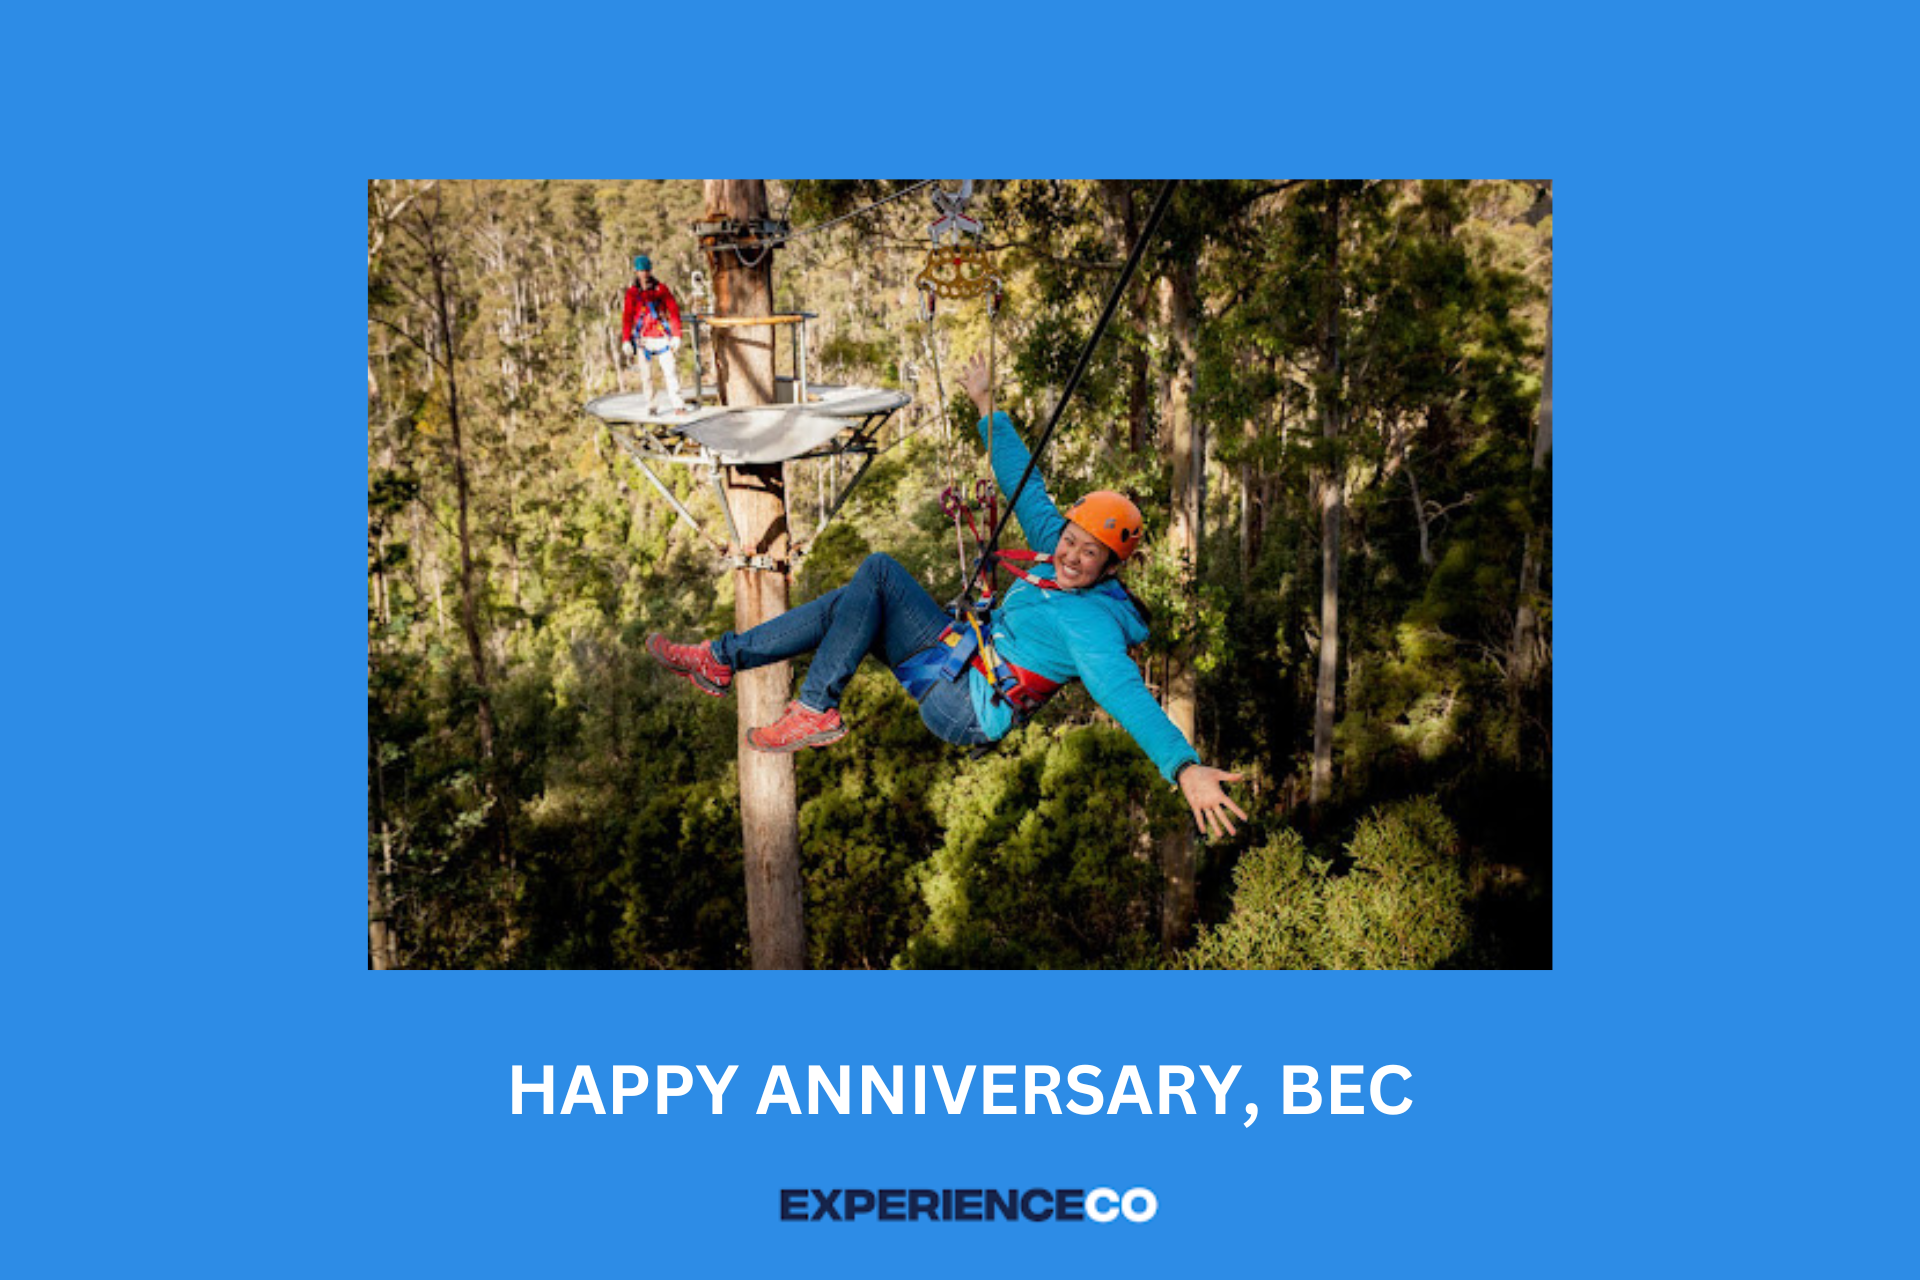 Bec Williams Celebrates 13 Years with EXP